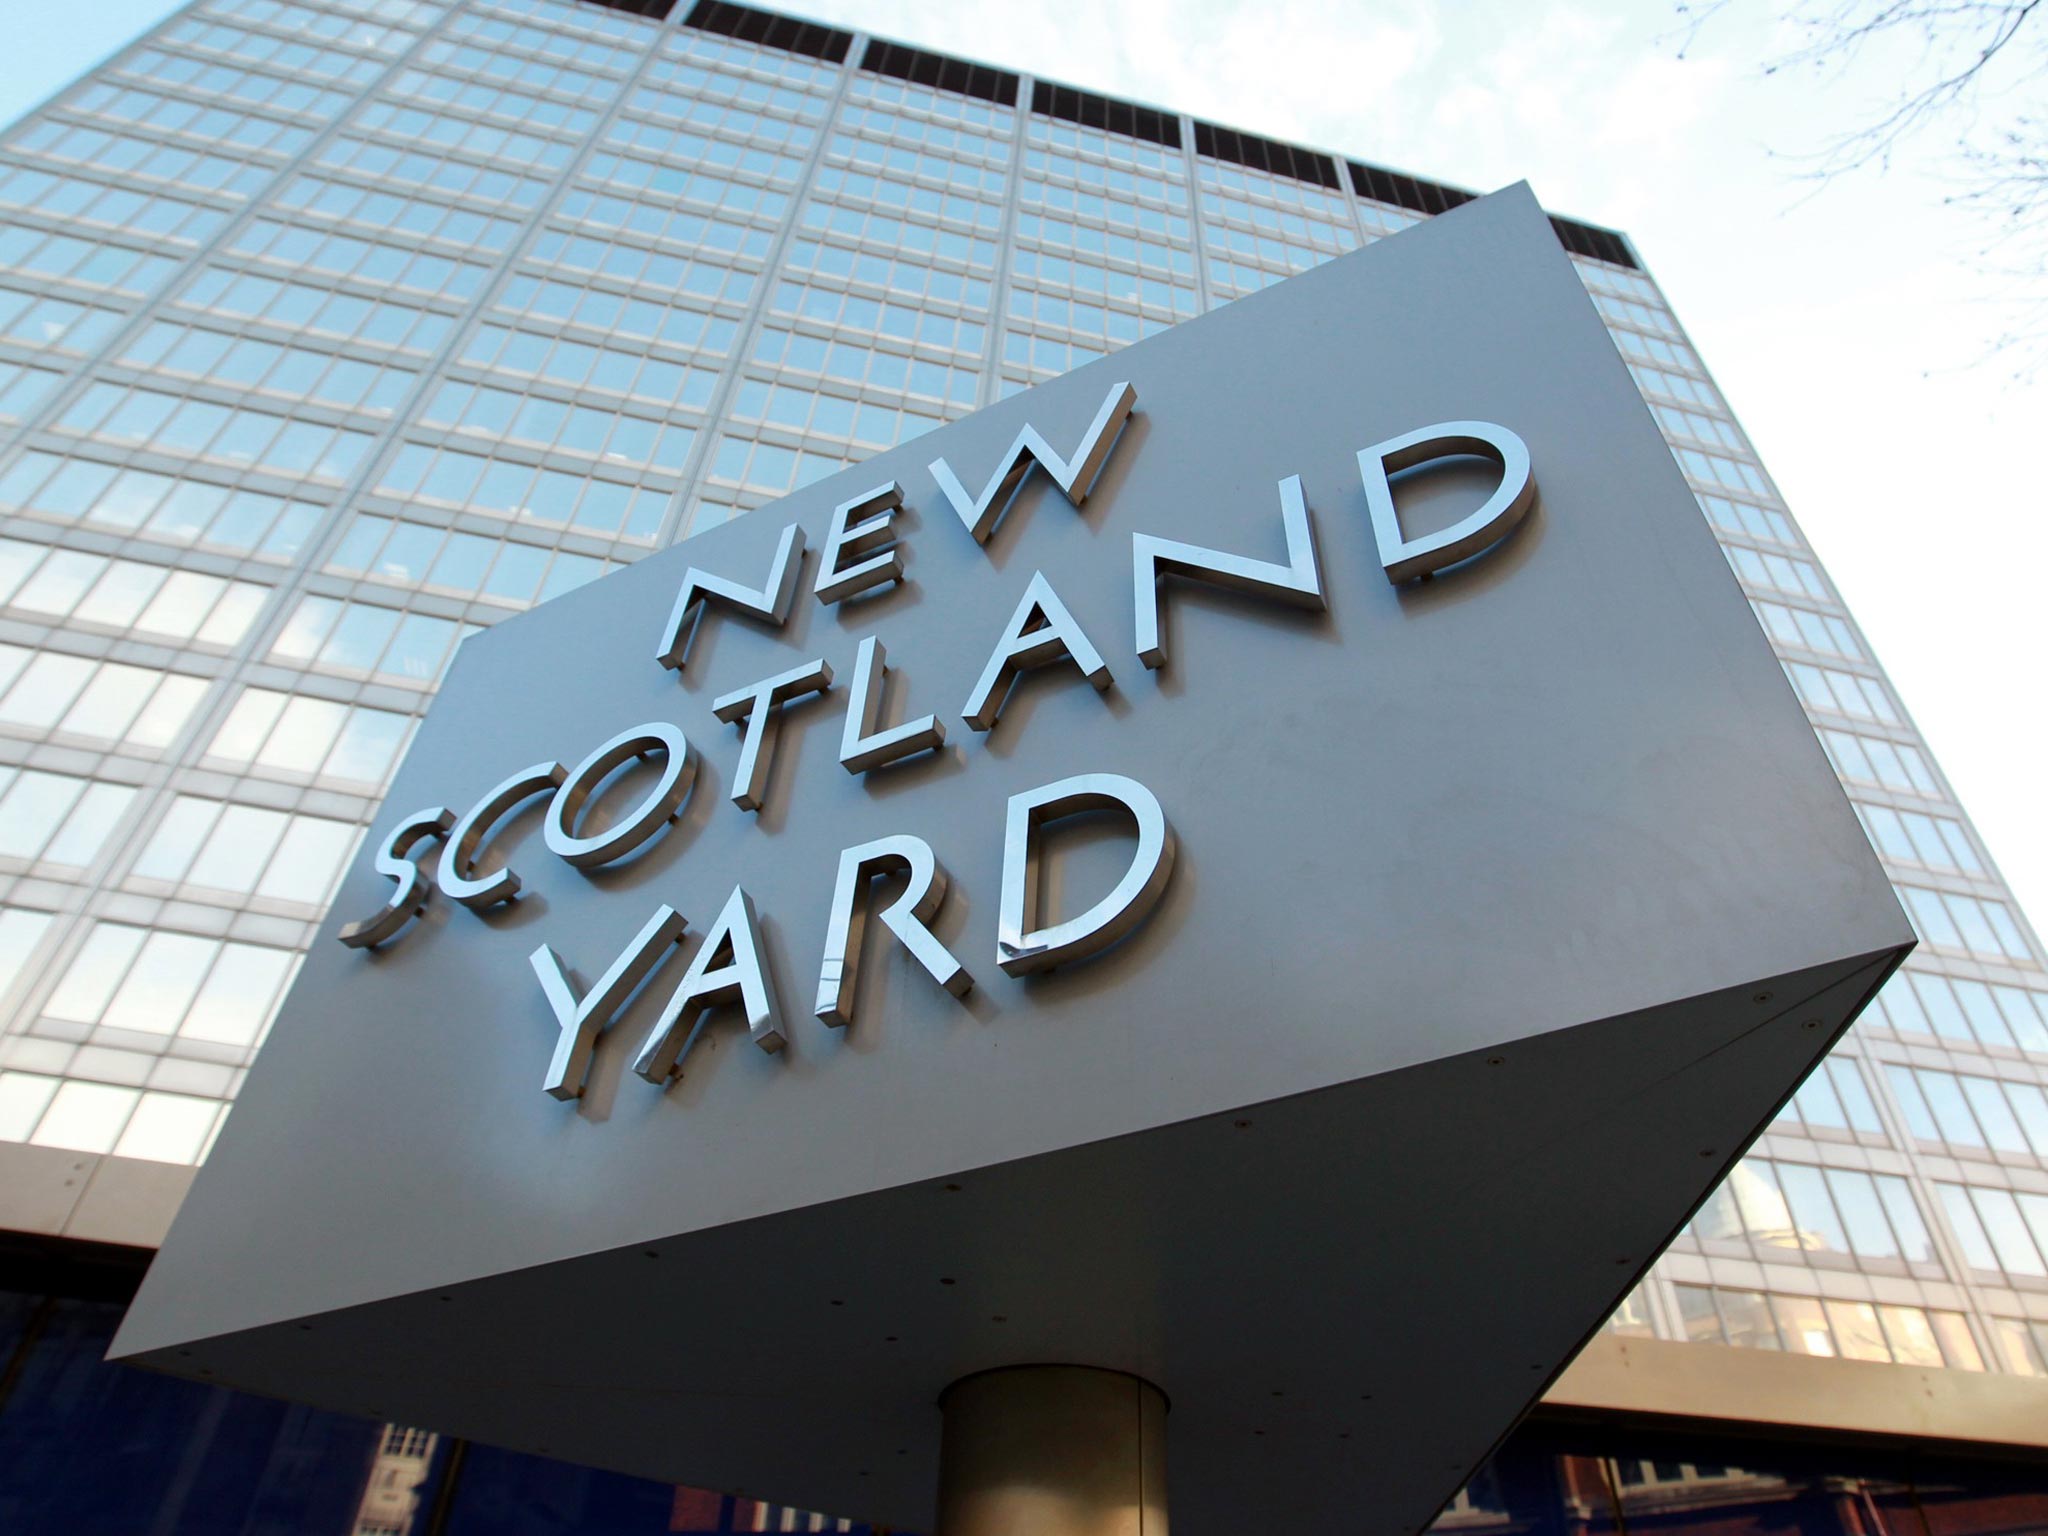 Information was unlawfully stored in Metropolitan Police vaults for 20 years